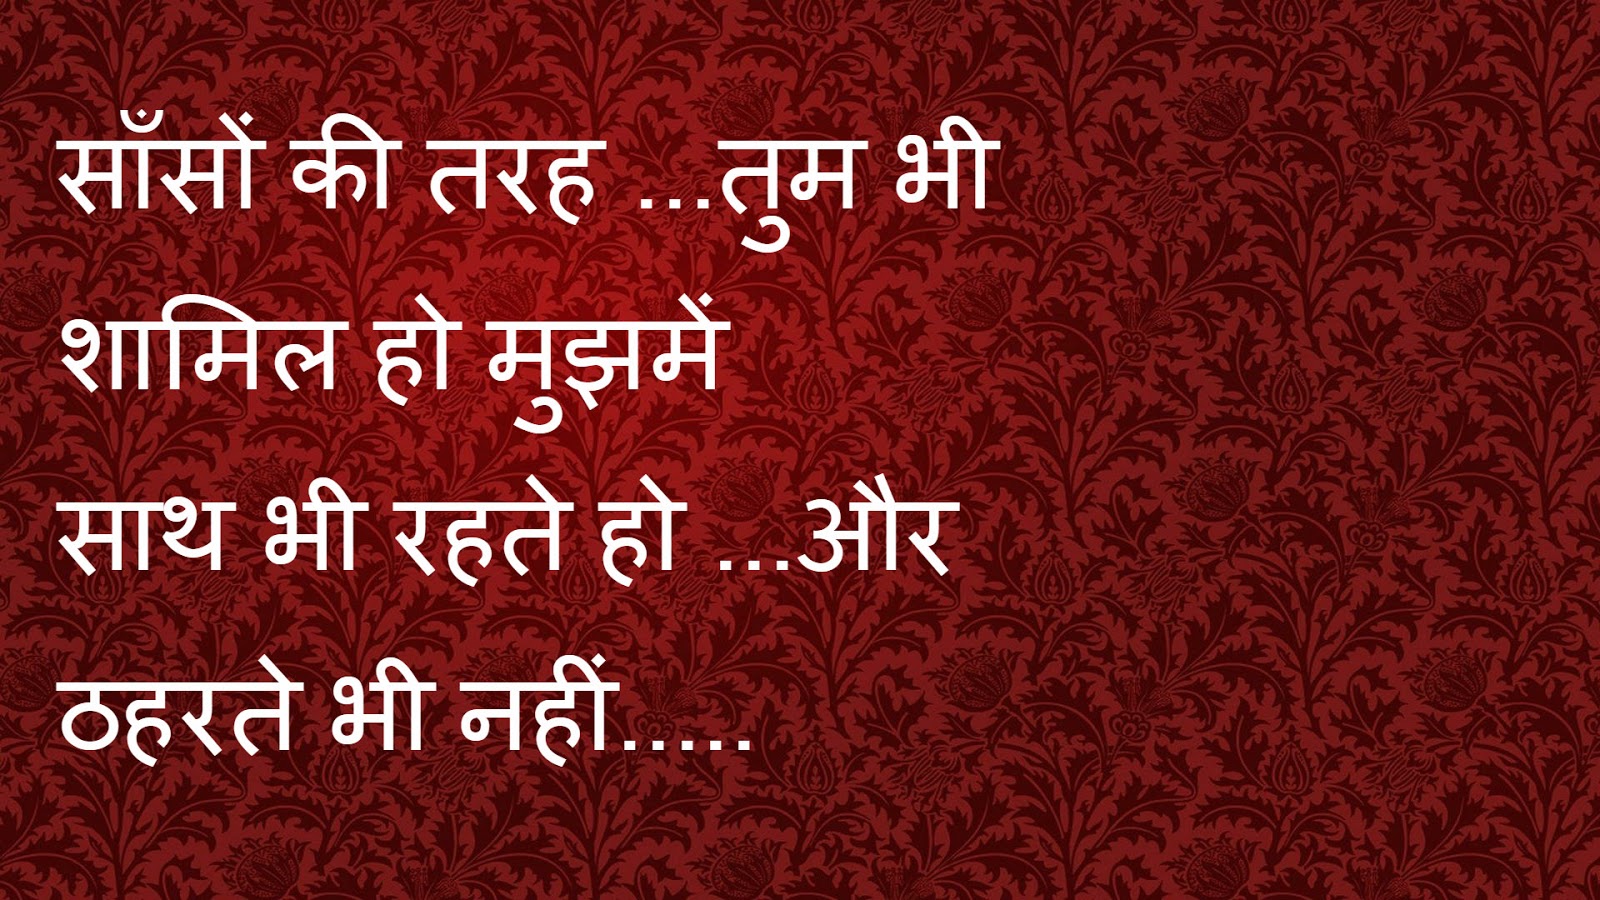 love quotes in hindi with images | Love quotes in hindi, Love quotes